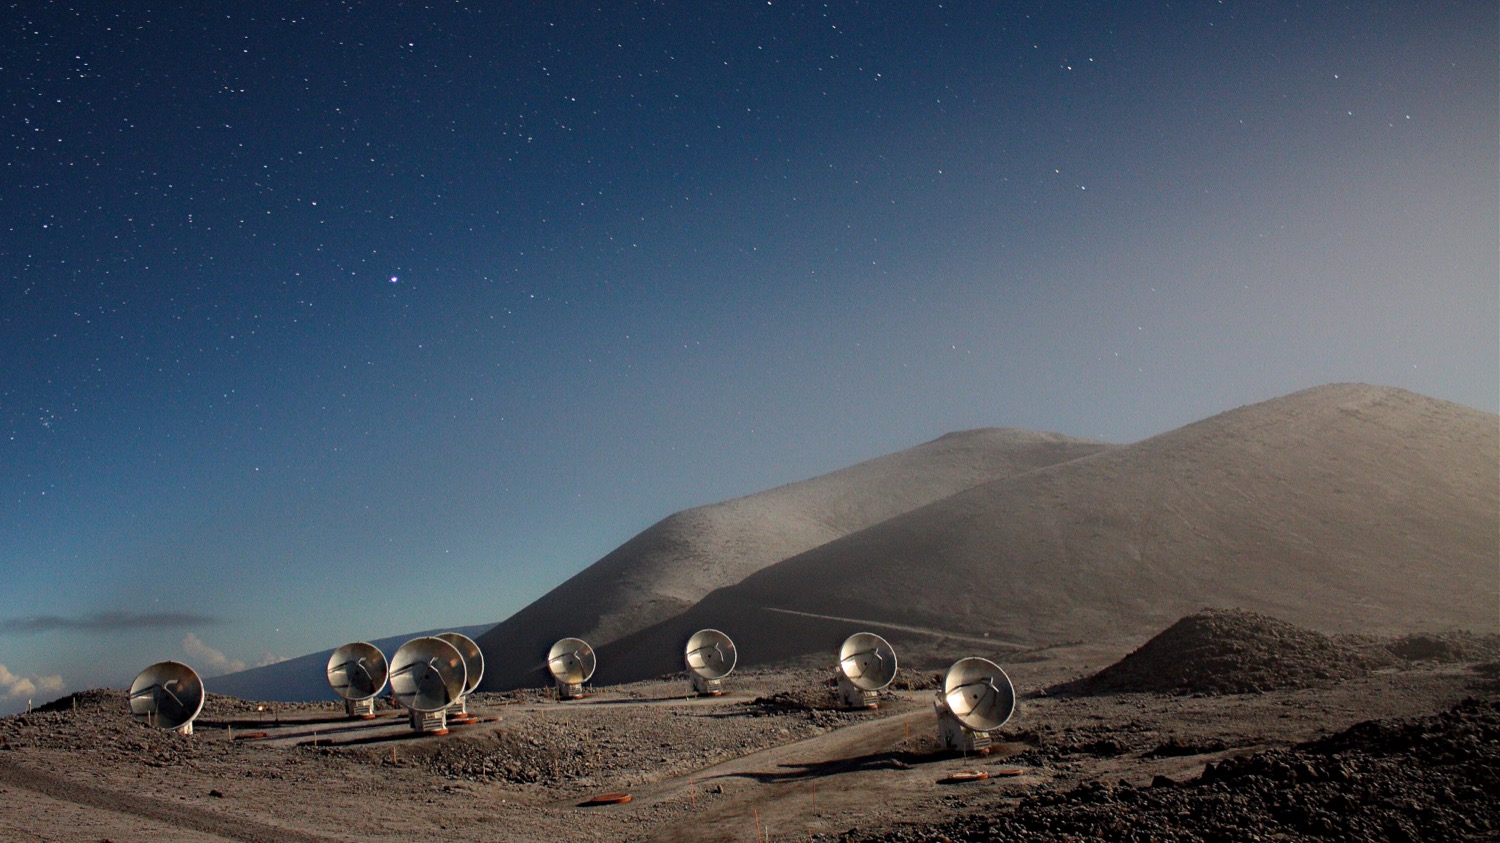 a group of telescopes with radio dishes among dunes and sitting under a dusk sky